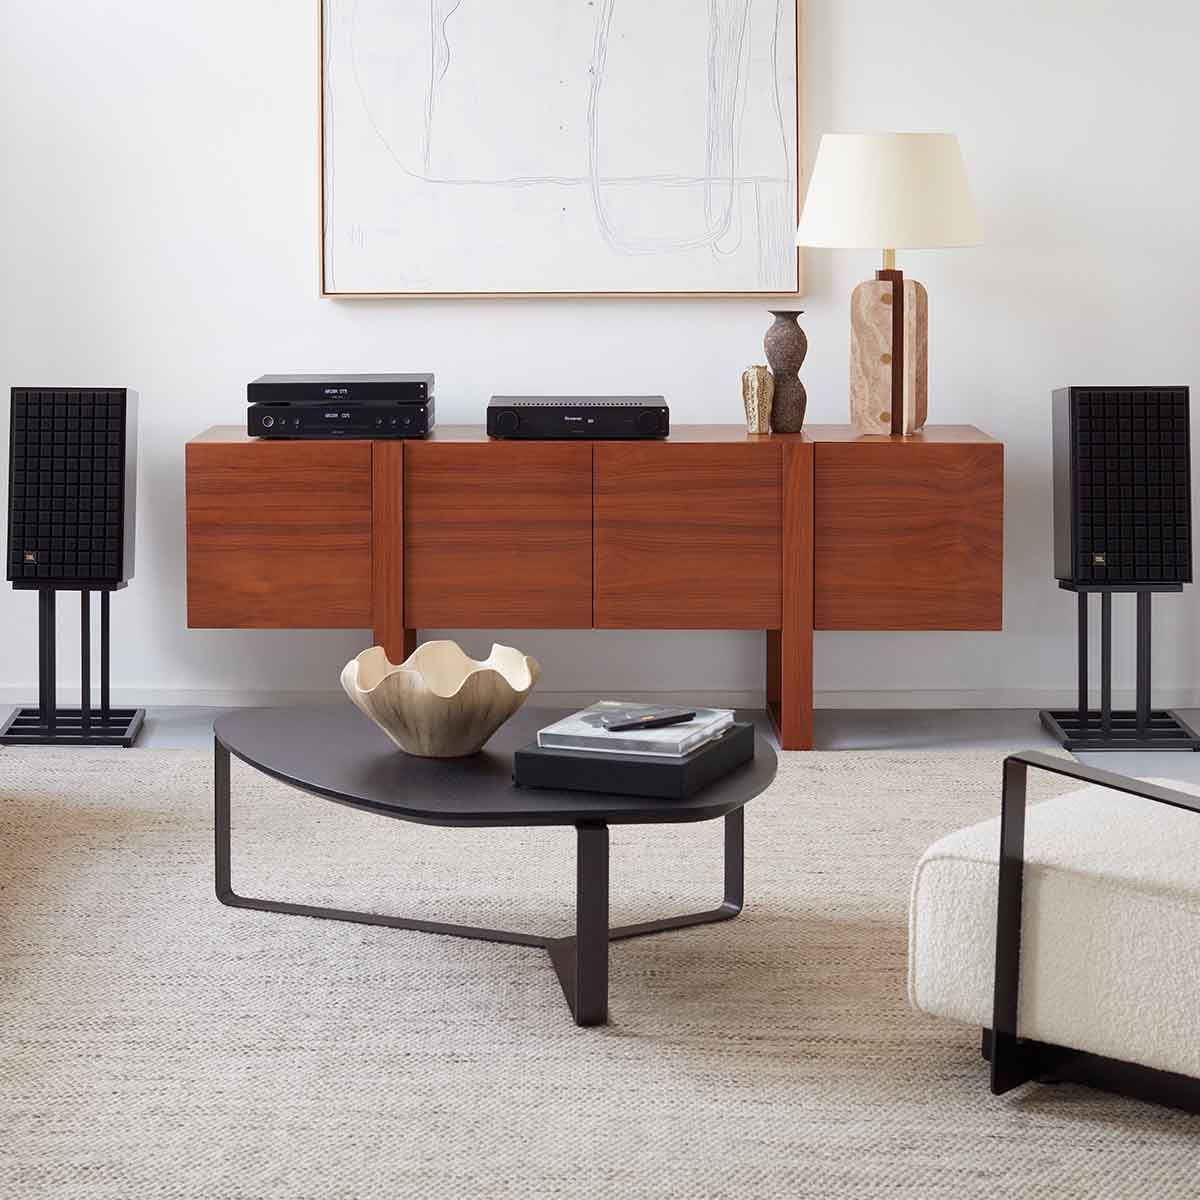 Arcam CD5 Compact Disc Player on credenza with Arcam A25 Integrated amplifier and JBL HDI tower speakers